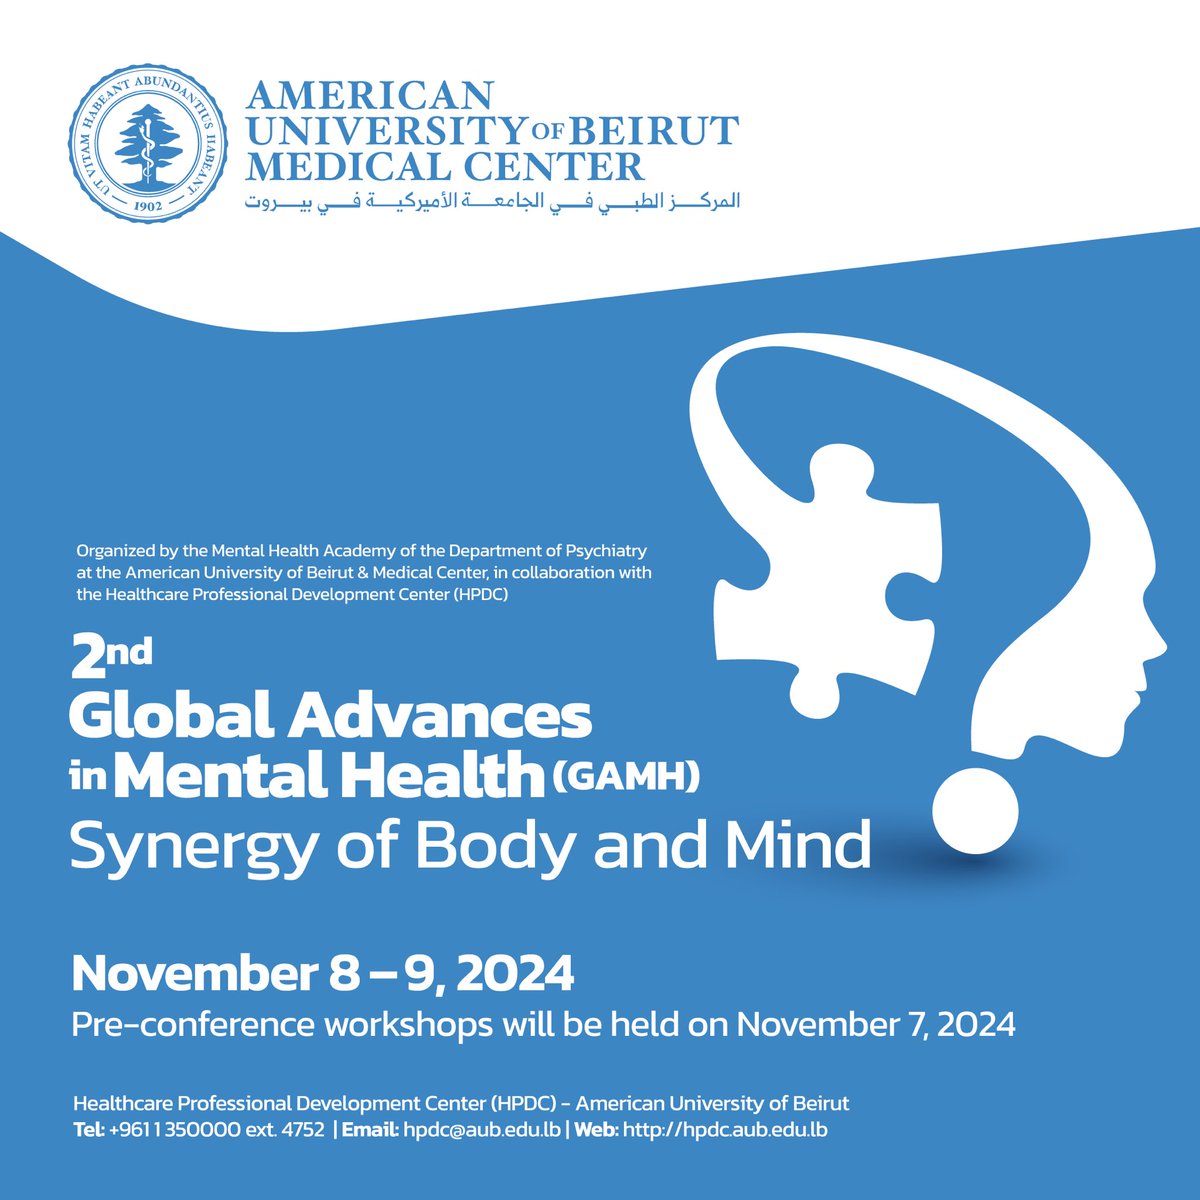 🚨Save the Date🚨 🗓️Mark your calendars and join us for the second edition of the Global Advances in Mental Health #GAMH conference on 𝐍𝐨𝐯𝐞𝐦𝐛𝐞𝐫 𝟖 𝐚𝐧𝐝 𝟗, 2024. ⭐️